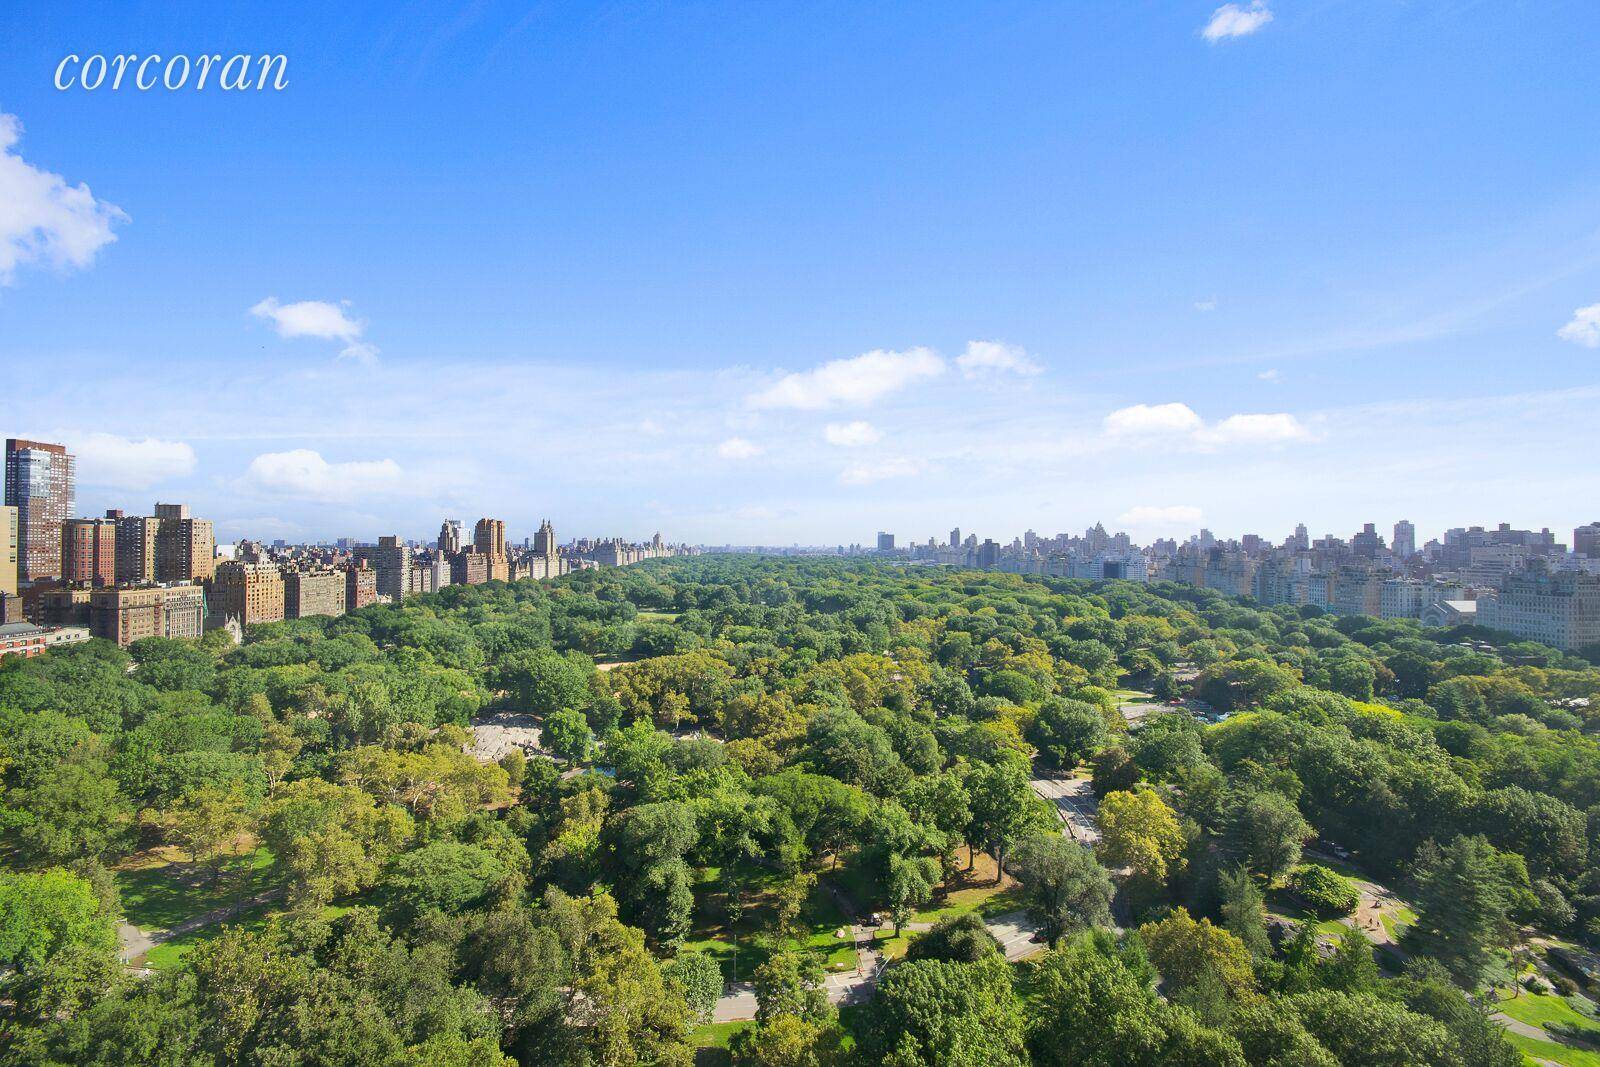 Enjoy breathtaking, unobstructed Central Park views from this amazing 2 bed 2 bath condominium perched high on the 25th floor of the historic Essex House.